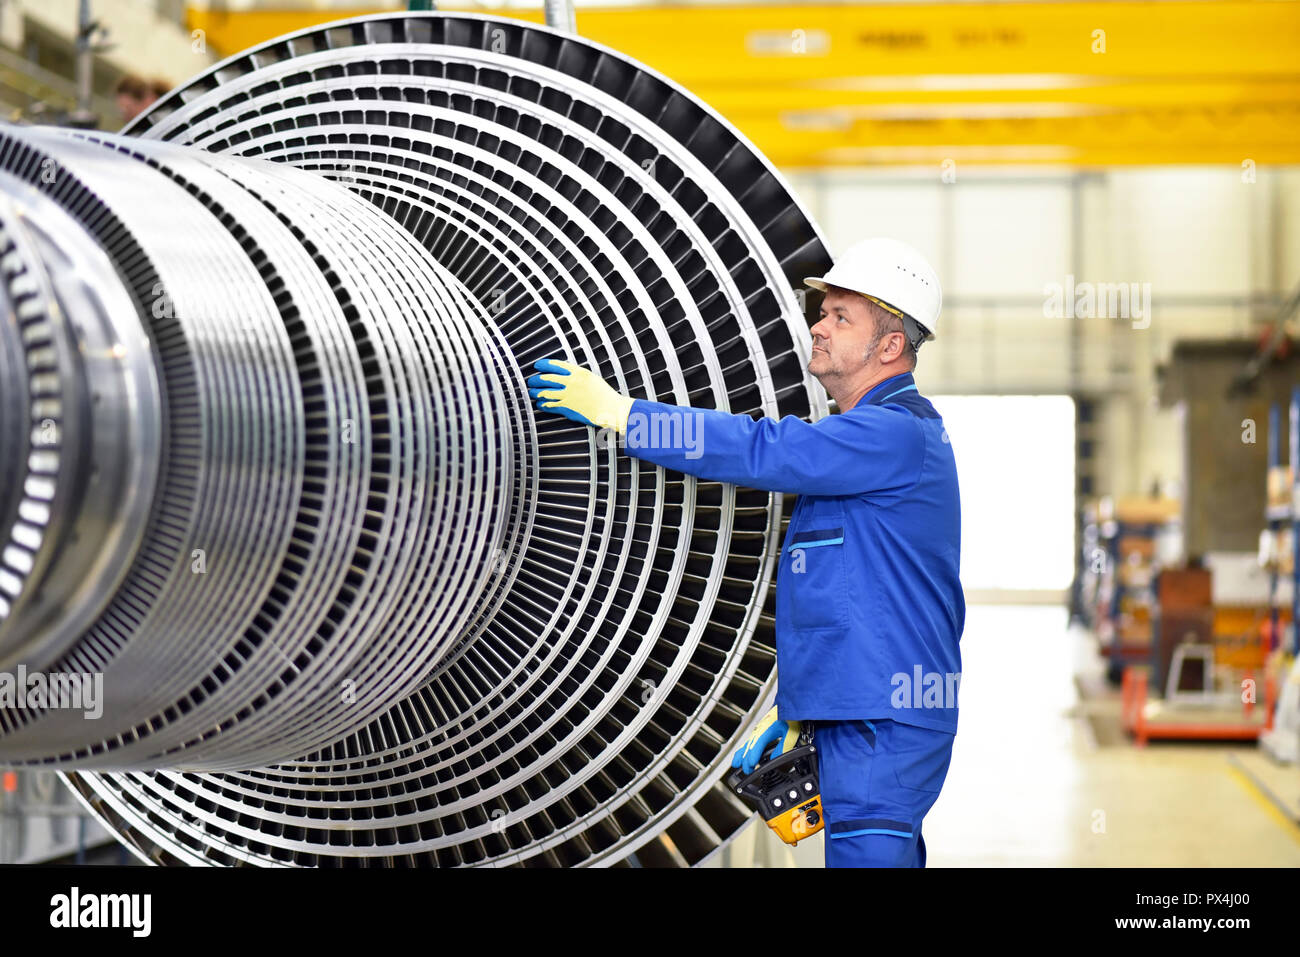 workers manufacturing steam turbines in an industrial factory Stock Photo